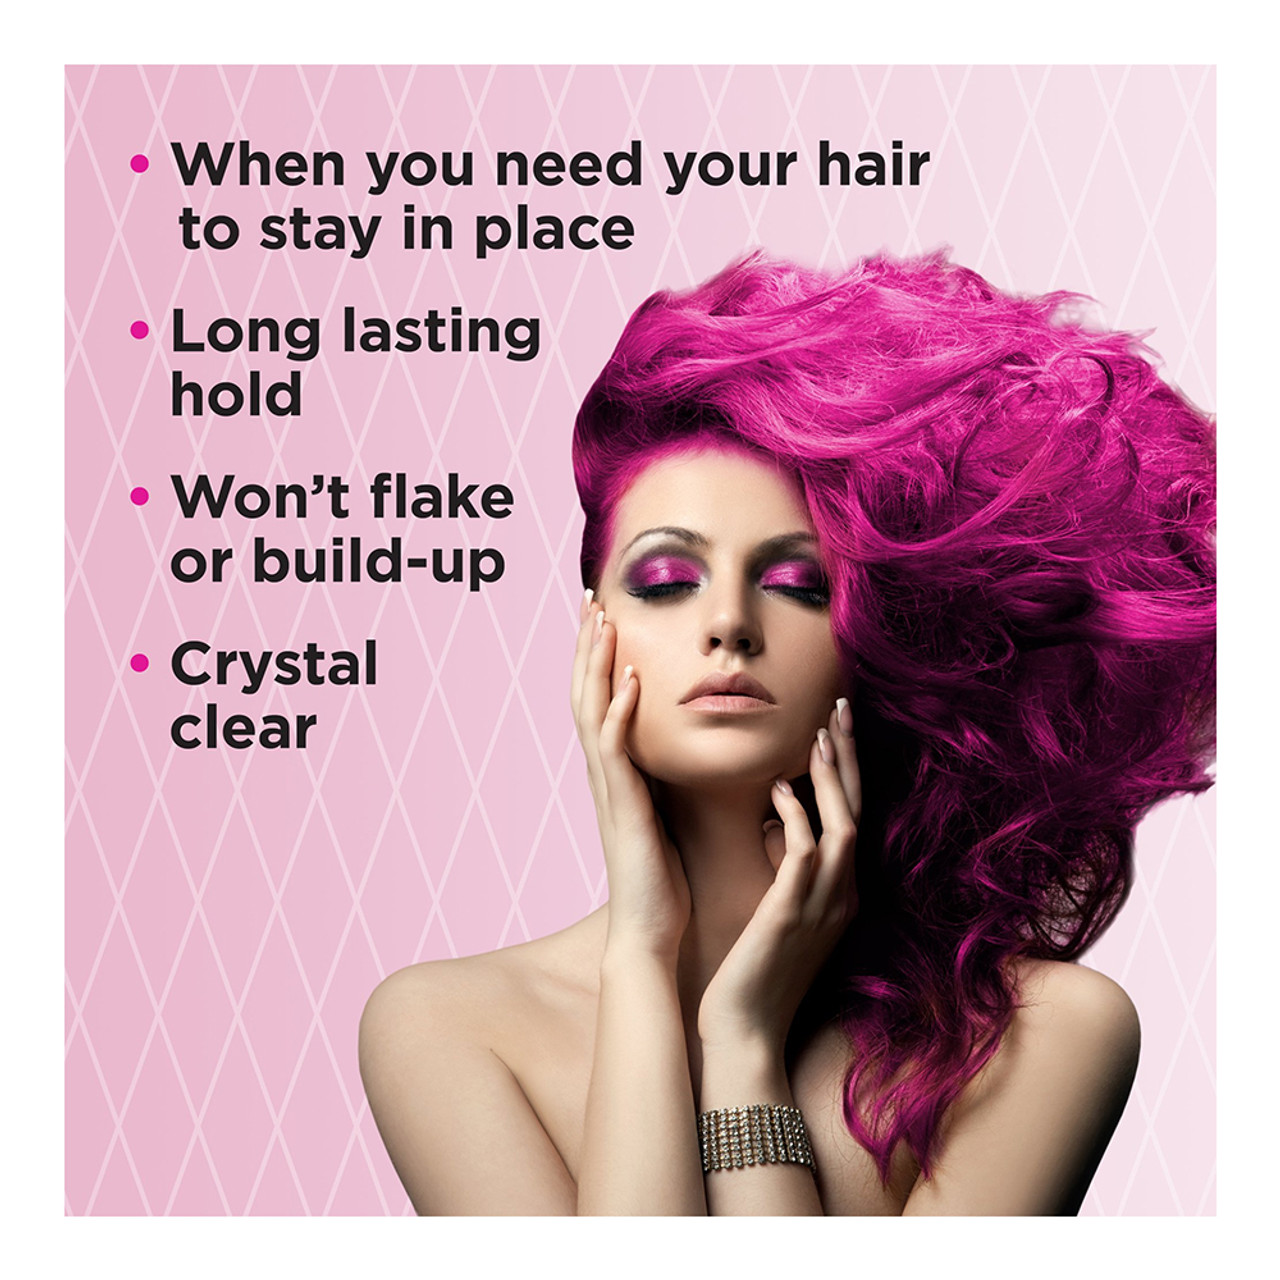 Aqua Net Hairspray, Professional, Extra Super Hold, Fresh Scent 11 Oz, Styling Products